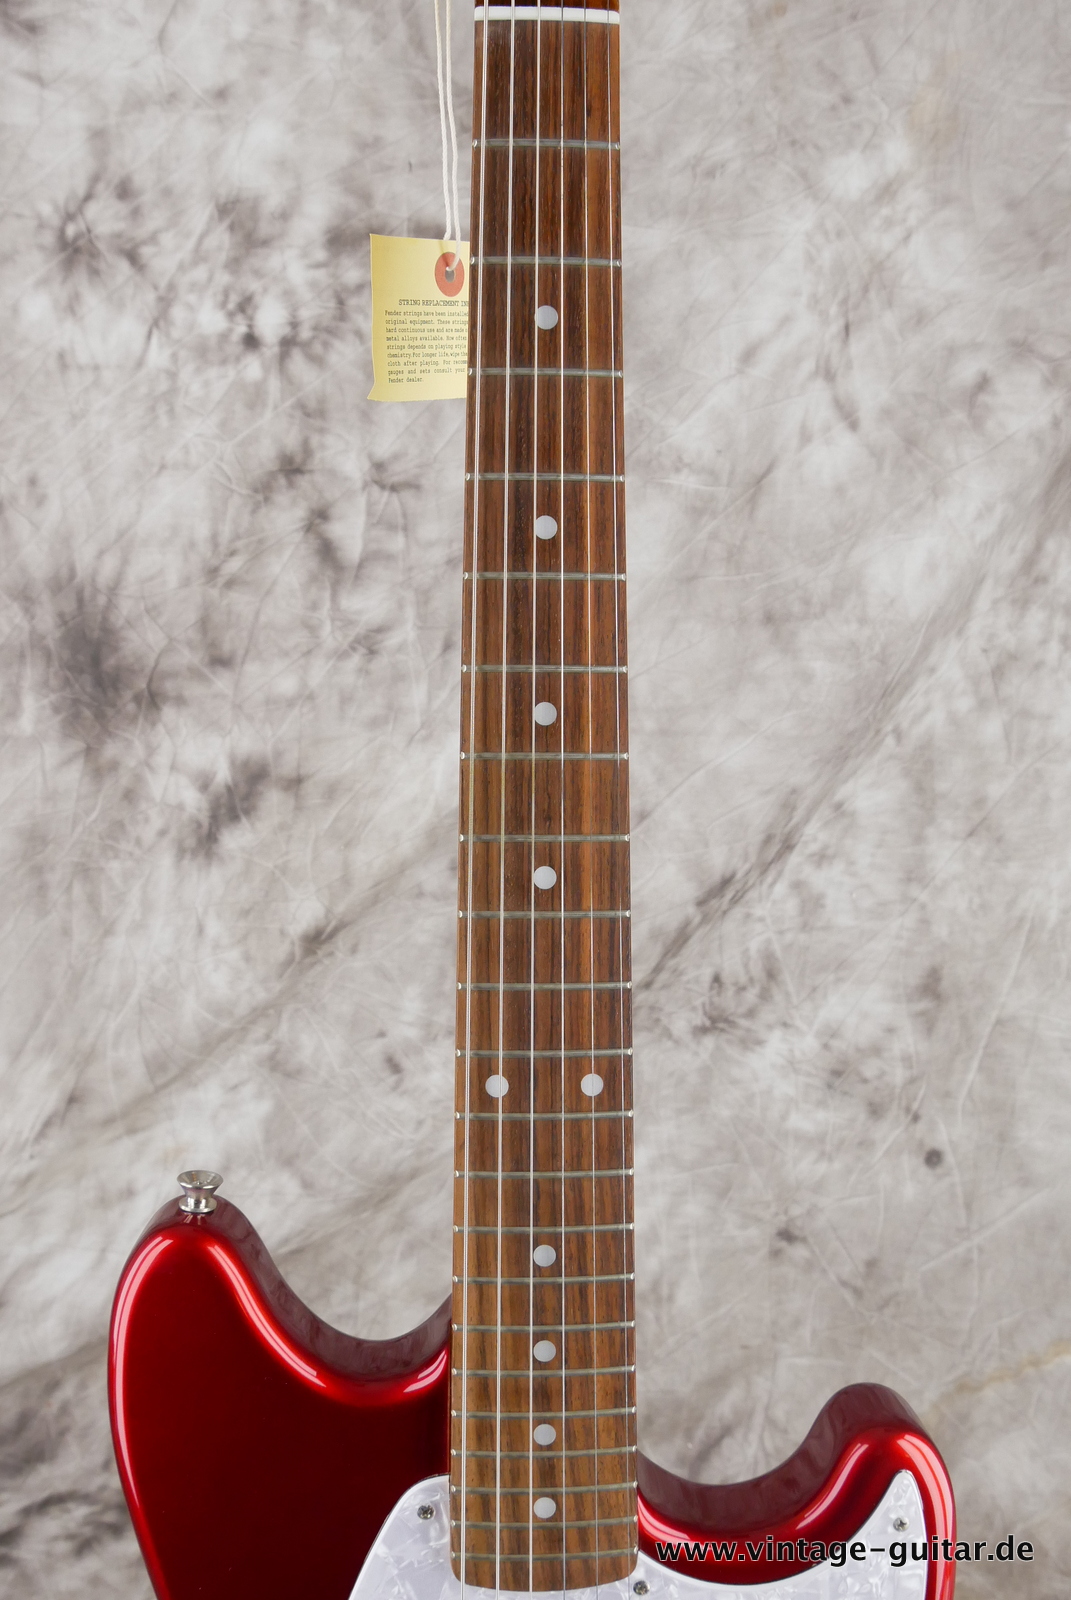 Fender_Mustang_competition_70s_RI_candy_apple_red_Japan_2002-011.JPG